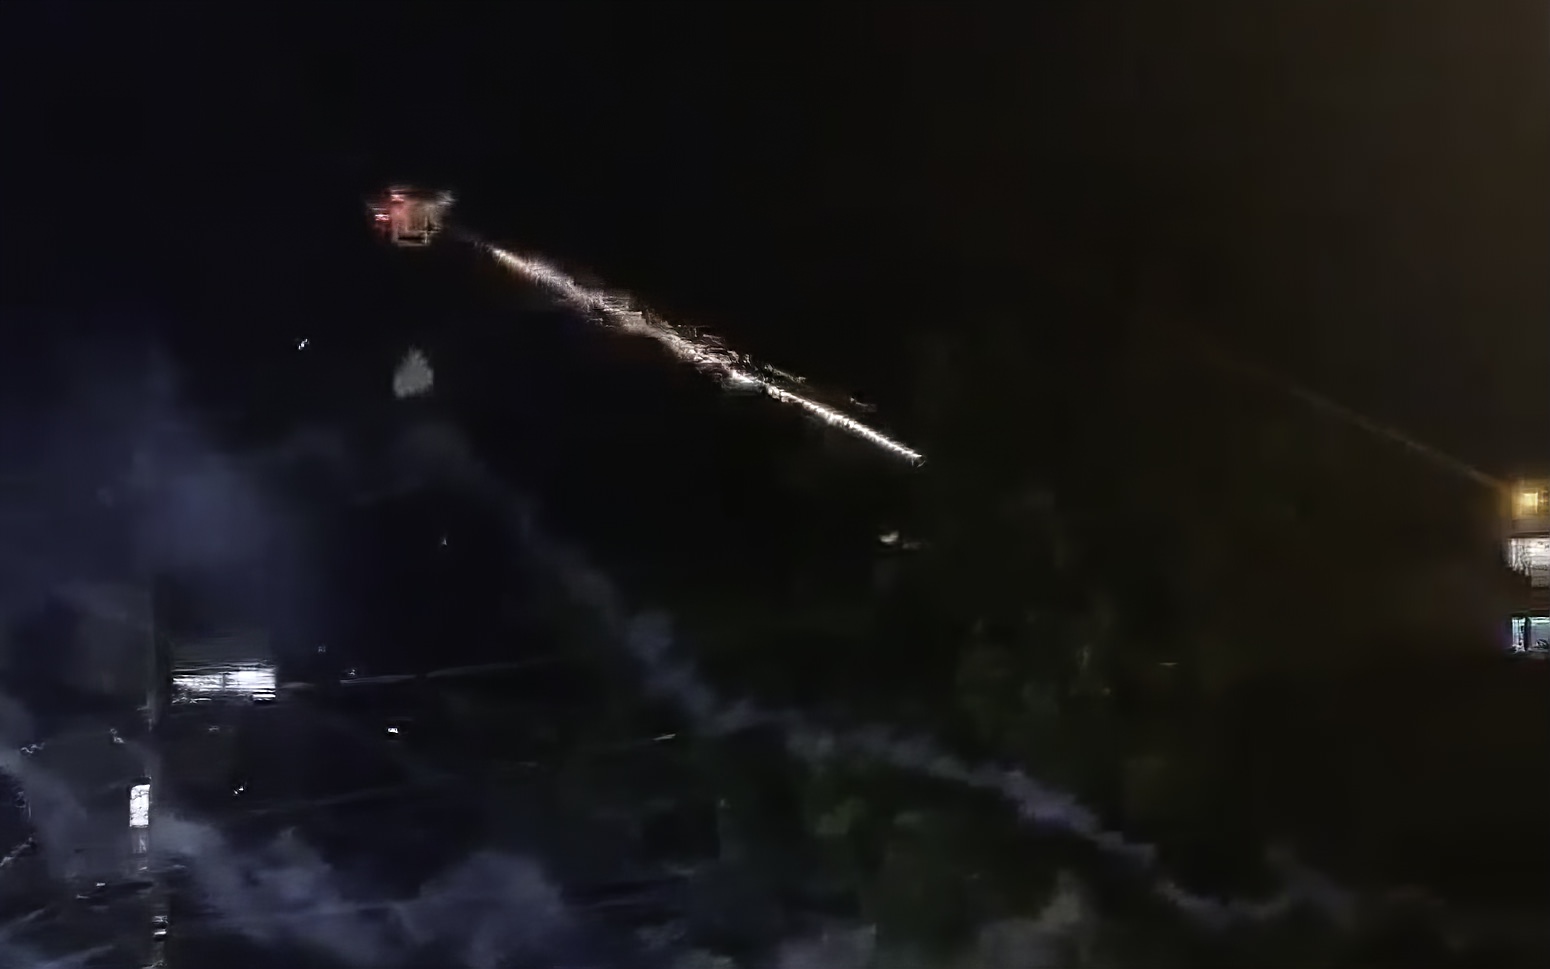 Viral video of DJI Phantom drone shooting fireworks likely to be a Hoax